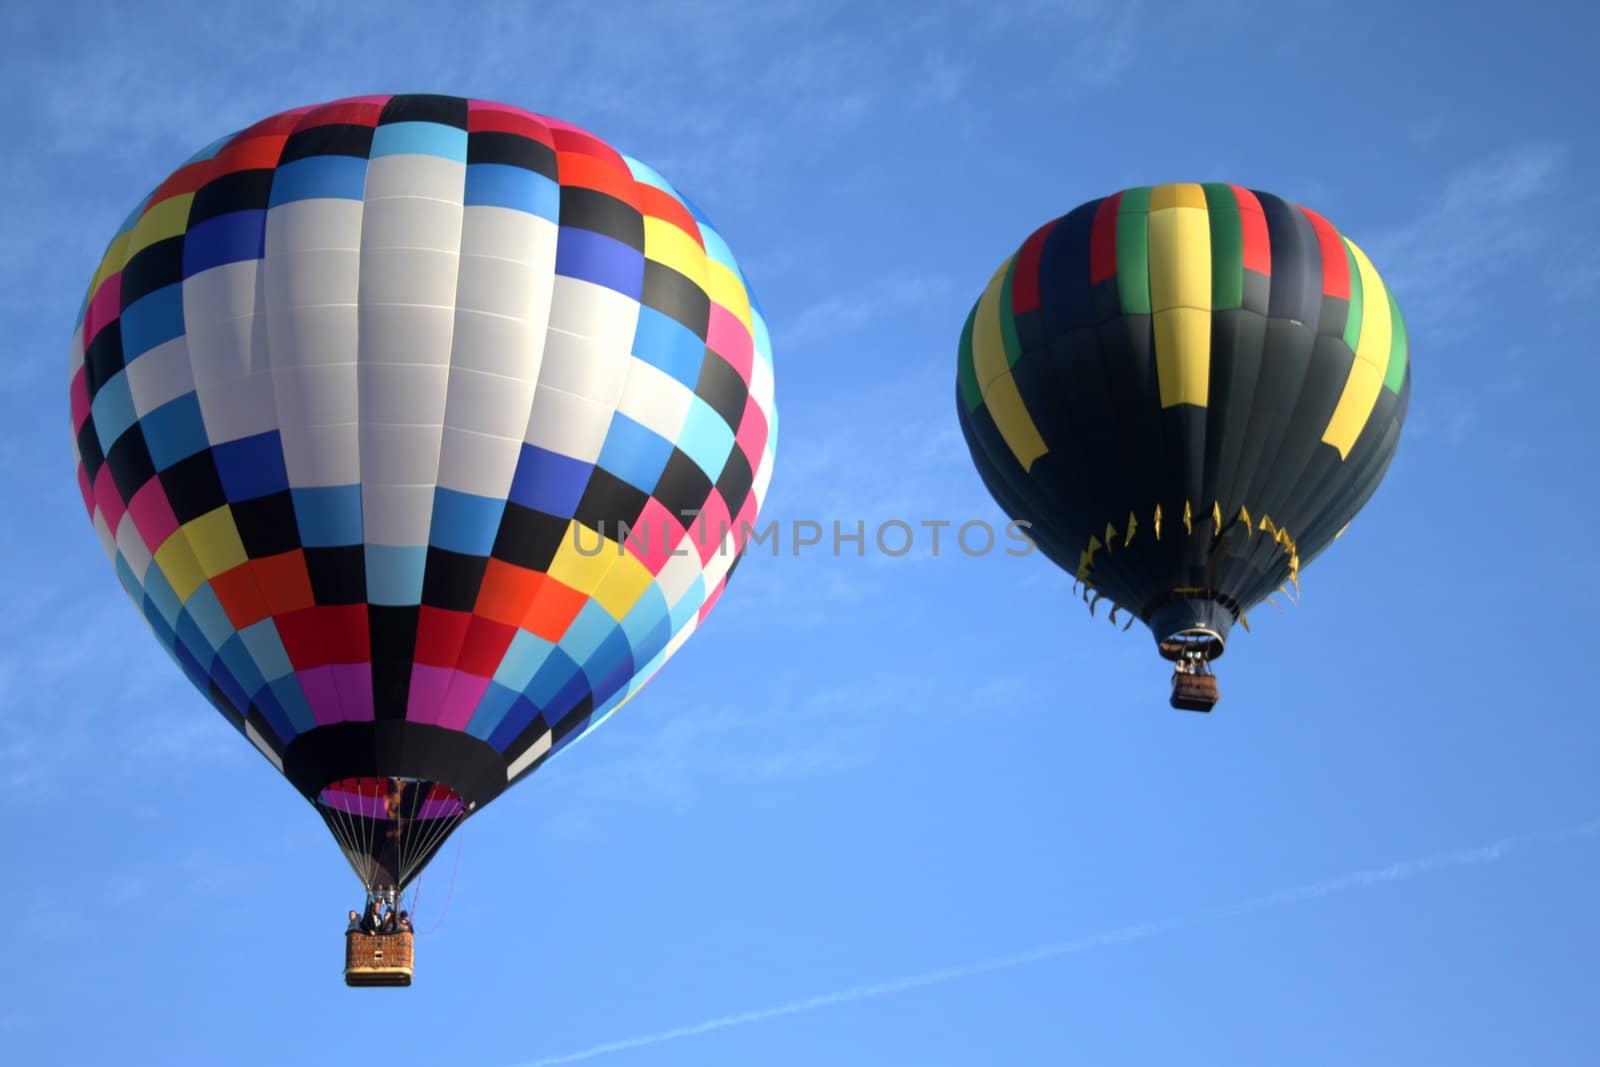 Pair of hot air balloons flying accross a blue sky